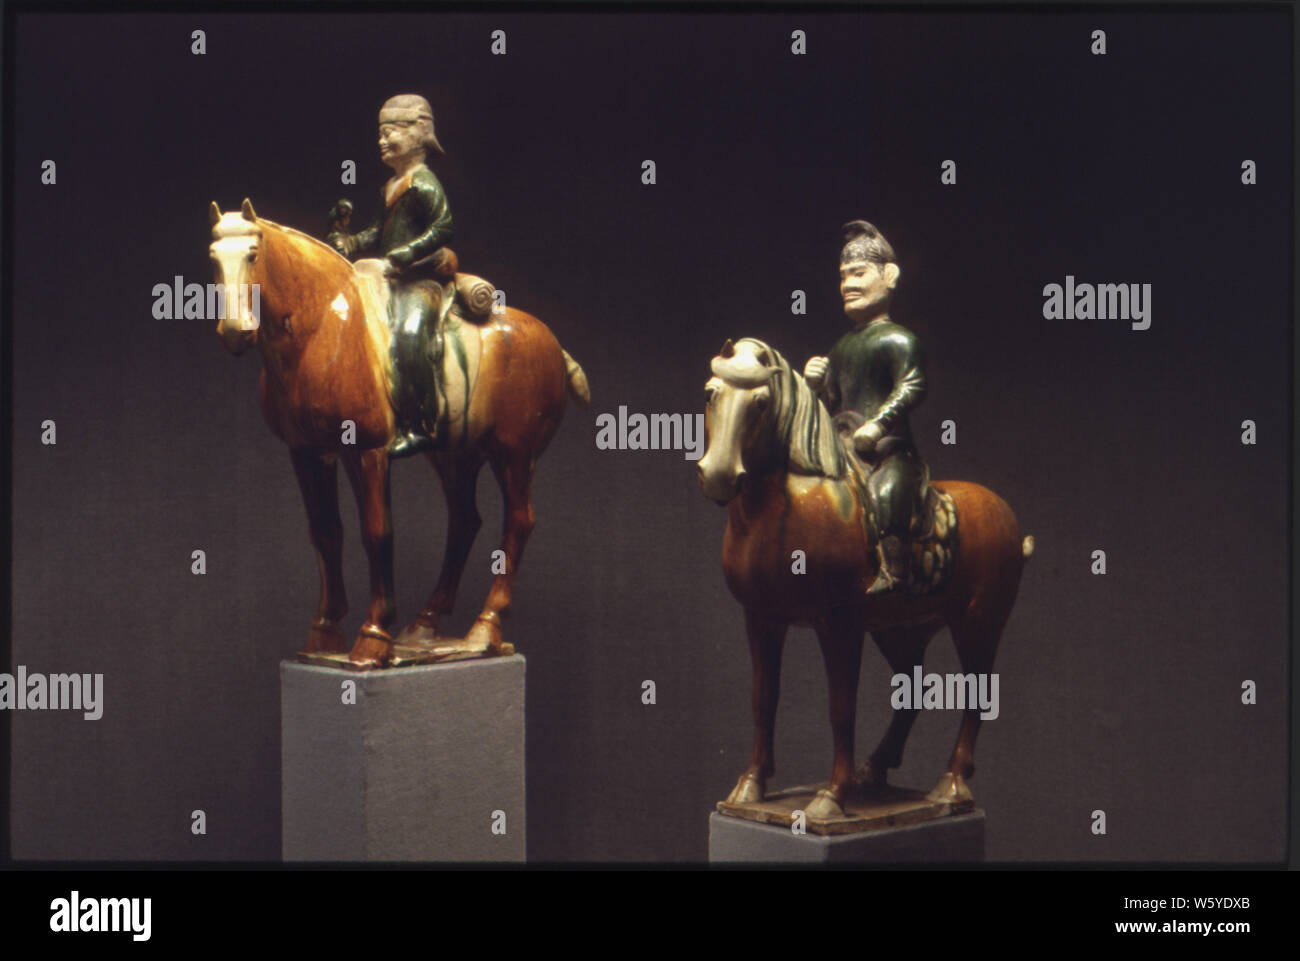 Two terra cotta tomb sculptures of men on horses; Scope and content:  Each figure is made of glazed and unglazed terra cotta. They were excavated near Sian, capital of Shensi Province and given to President and Mrs. Lyndon B. Johnson from President and Madame Chiang Kai-Shek of the Republic of China. The artist is unknown. General notes:  From left to right, the first figure measures 16 x 13-3/4 x 4; the second measures 16-1/2 x 14-3/4 x 4-1/4. Stock Photo